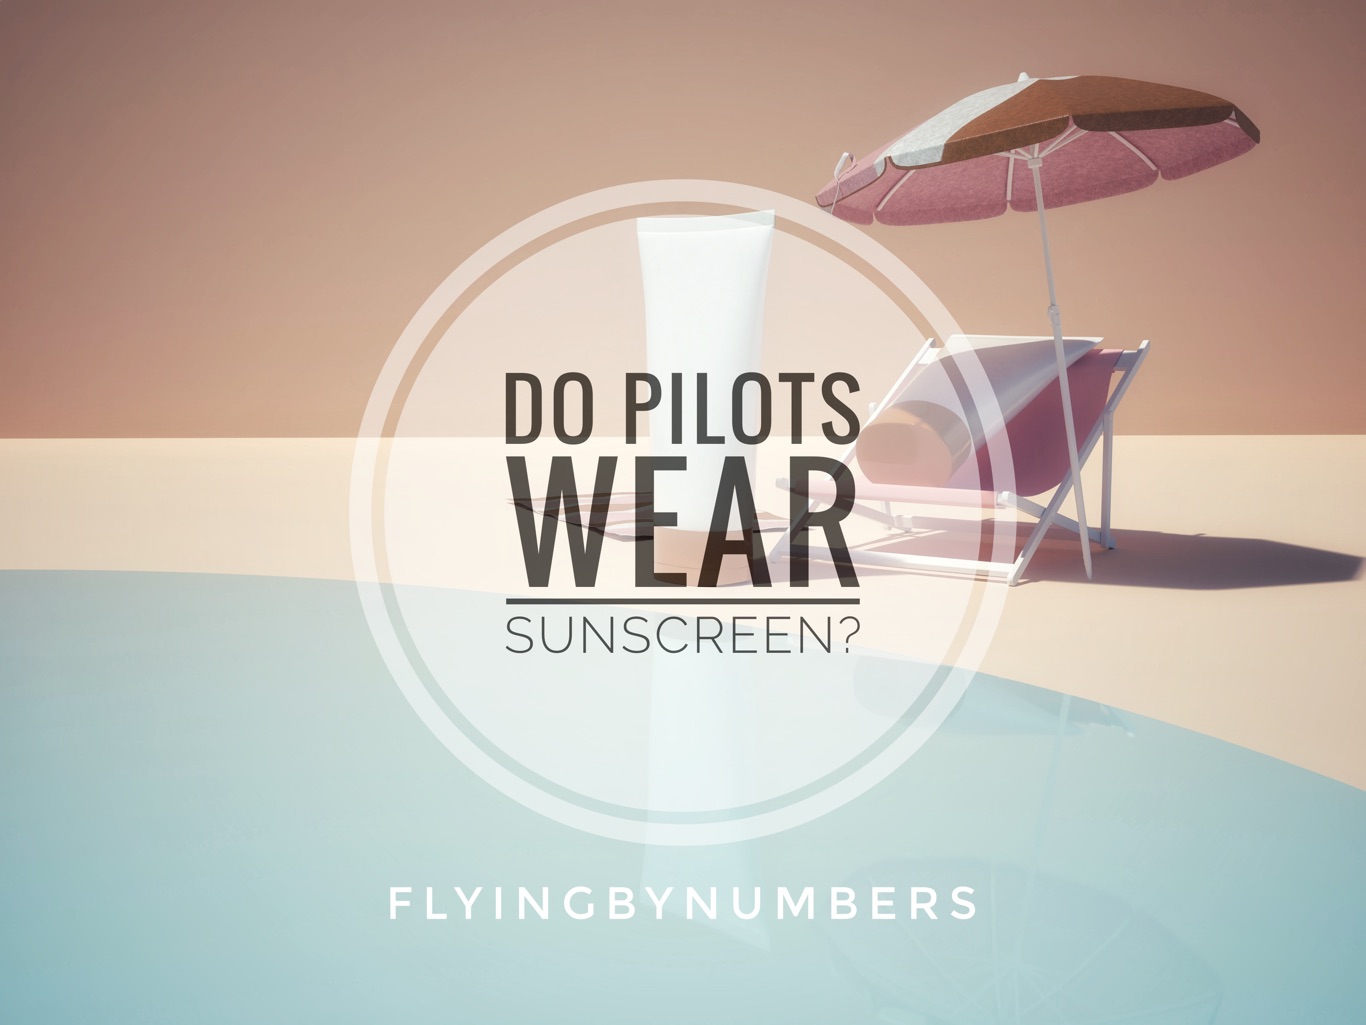 Sun loungers and sun screen, a look at if airline pilots wear sunscreen